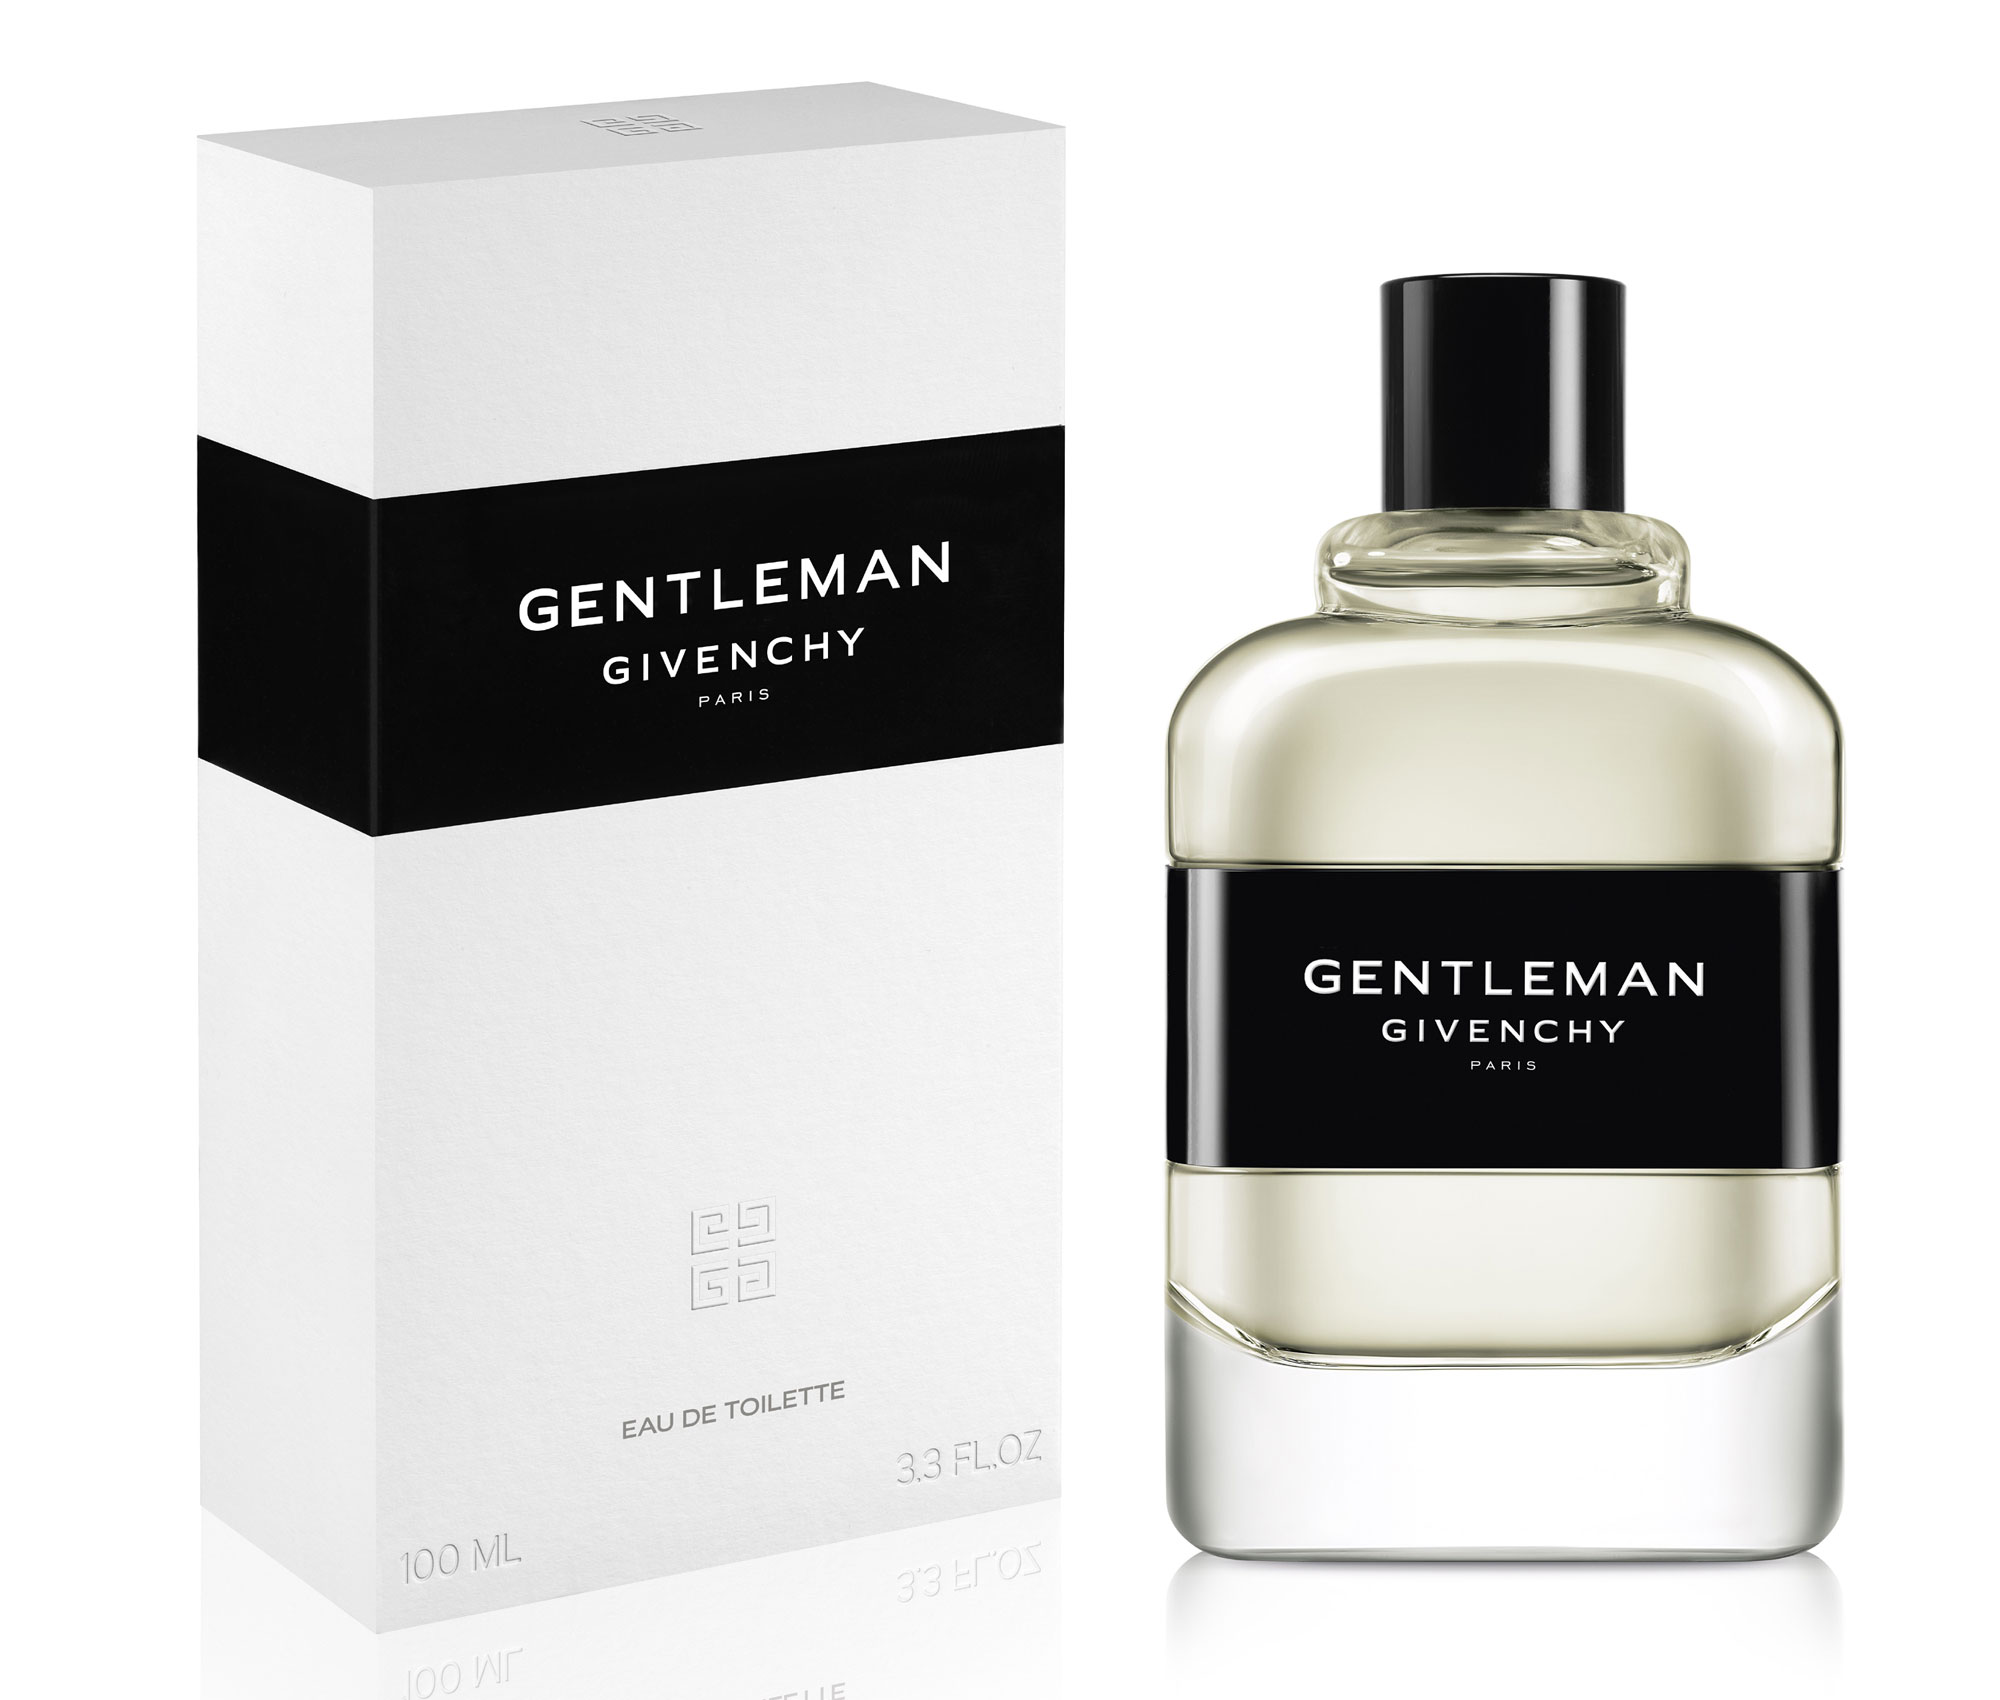 gentleman givenchy fragrantica off 54% - www.mjmills.in